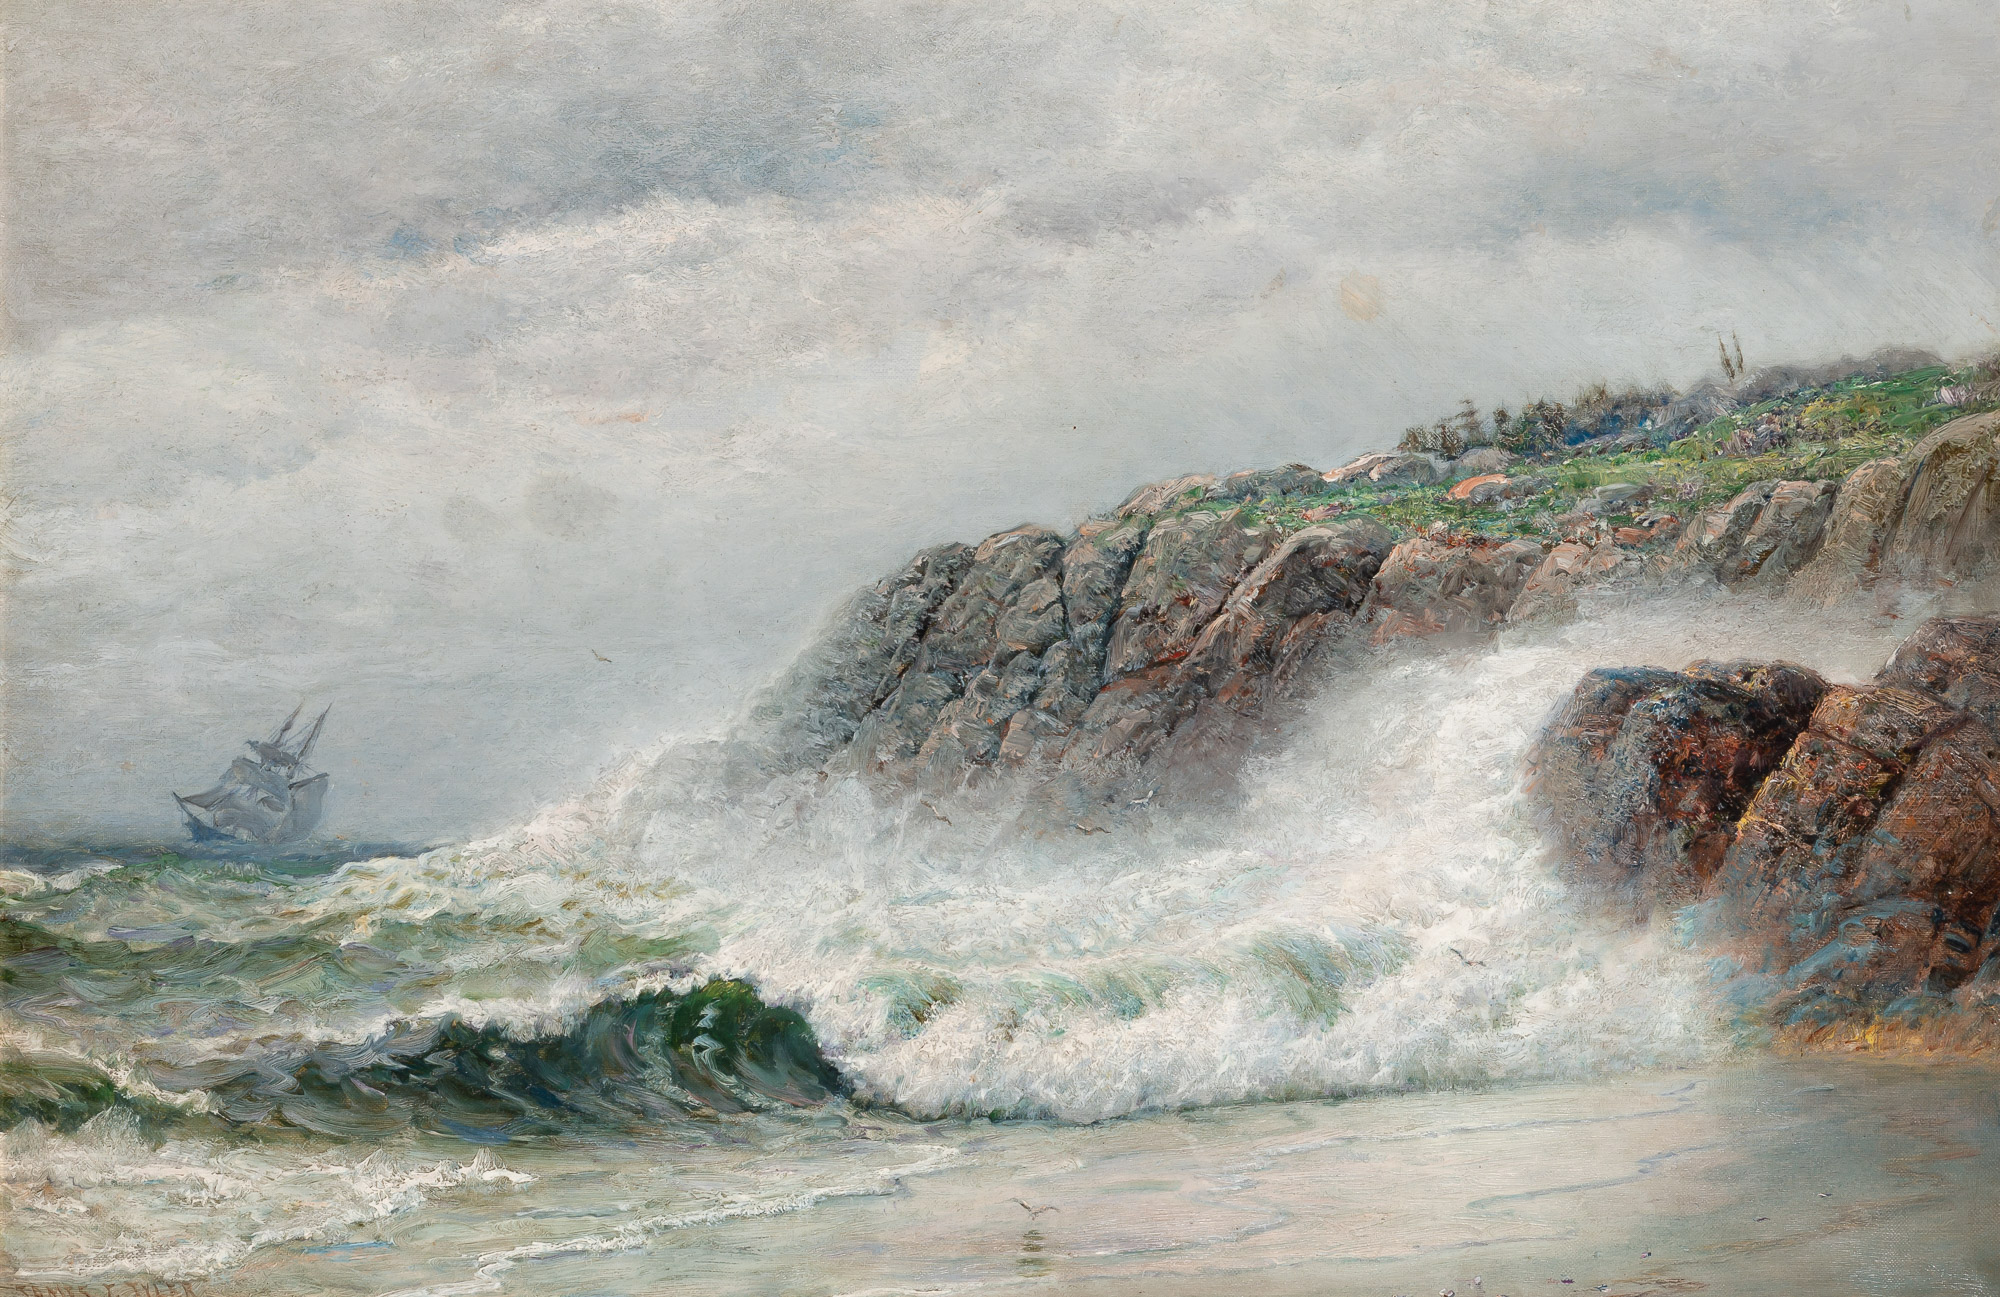 painting of a Rocky Coastal Scene with Crashing Waves by James Gale Tyler